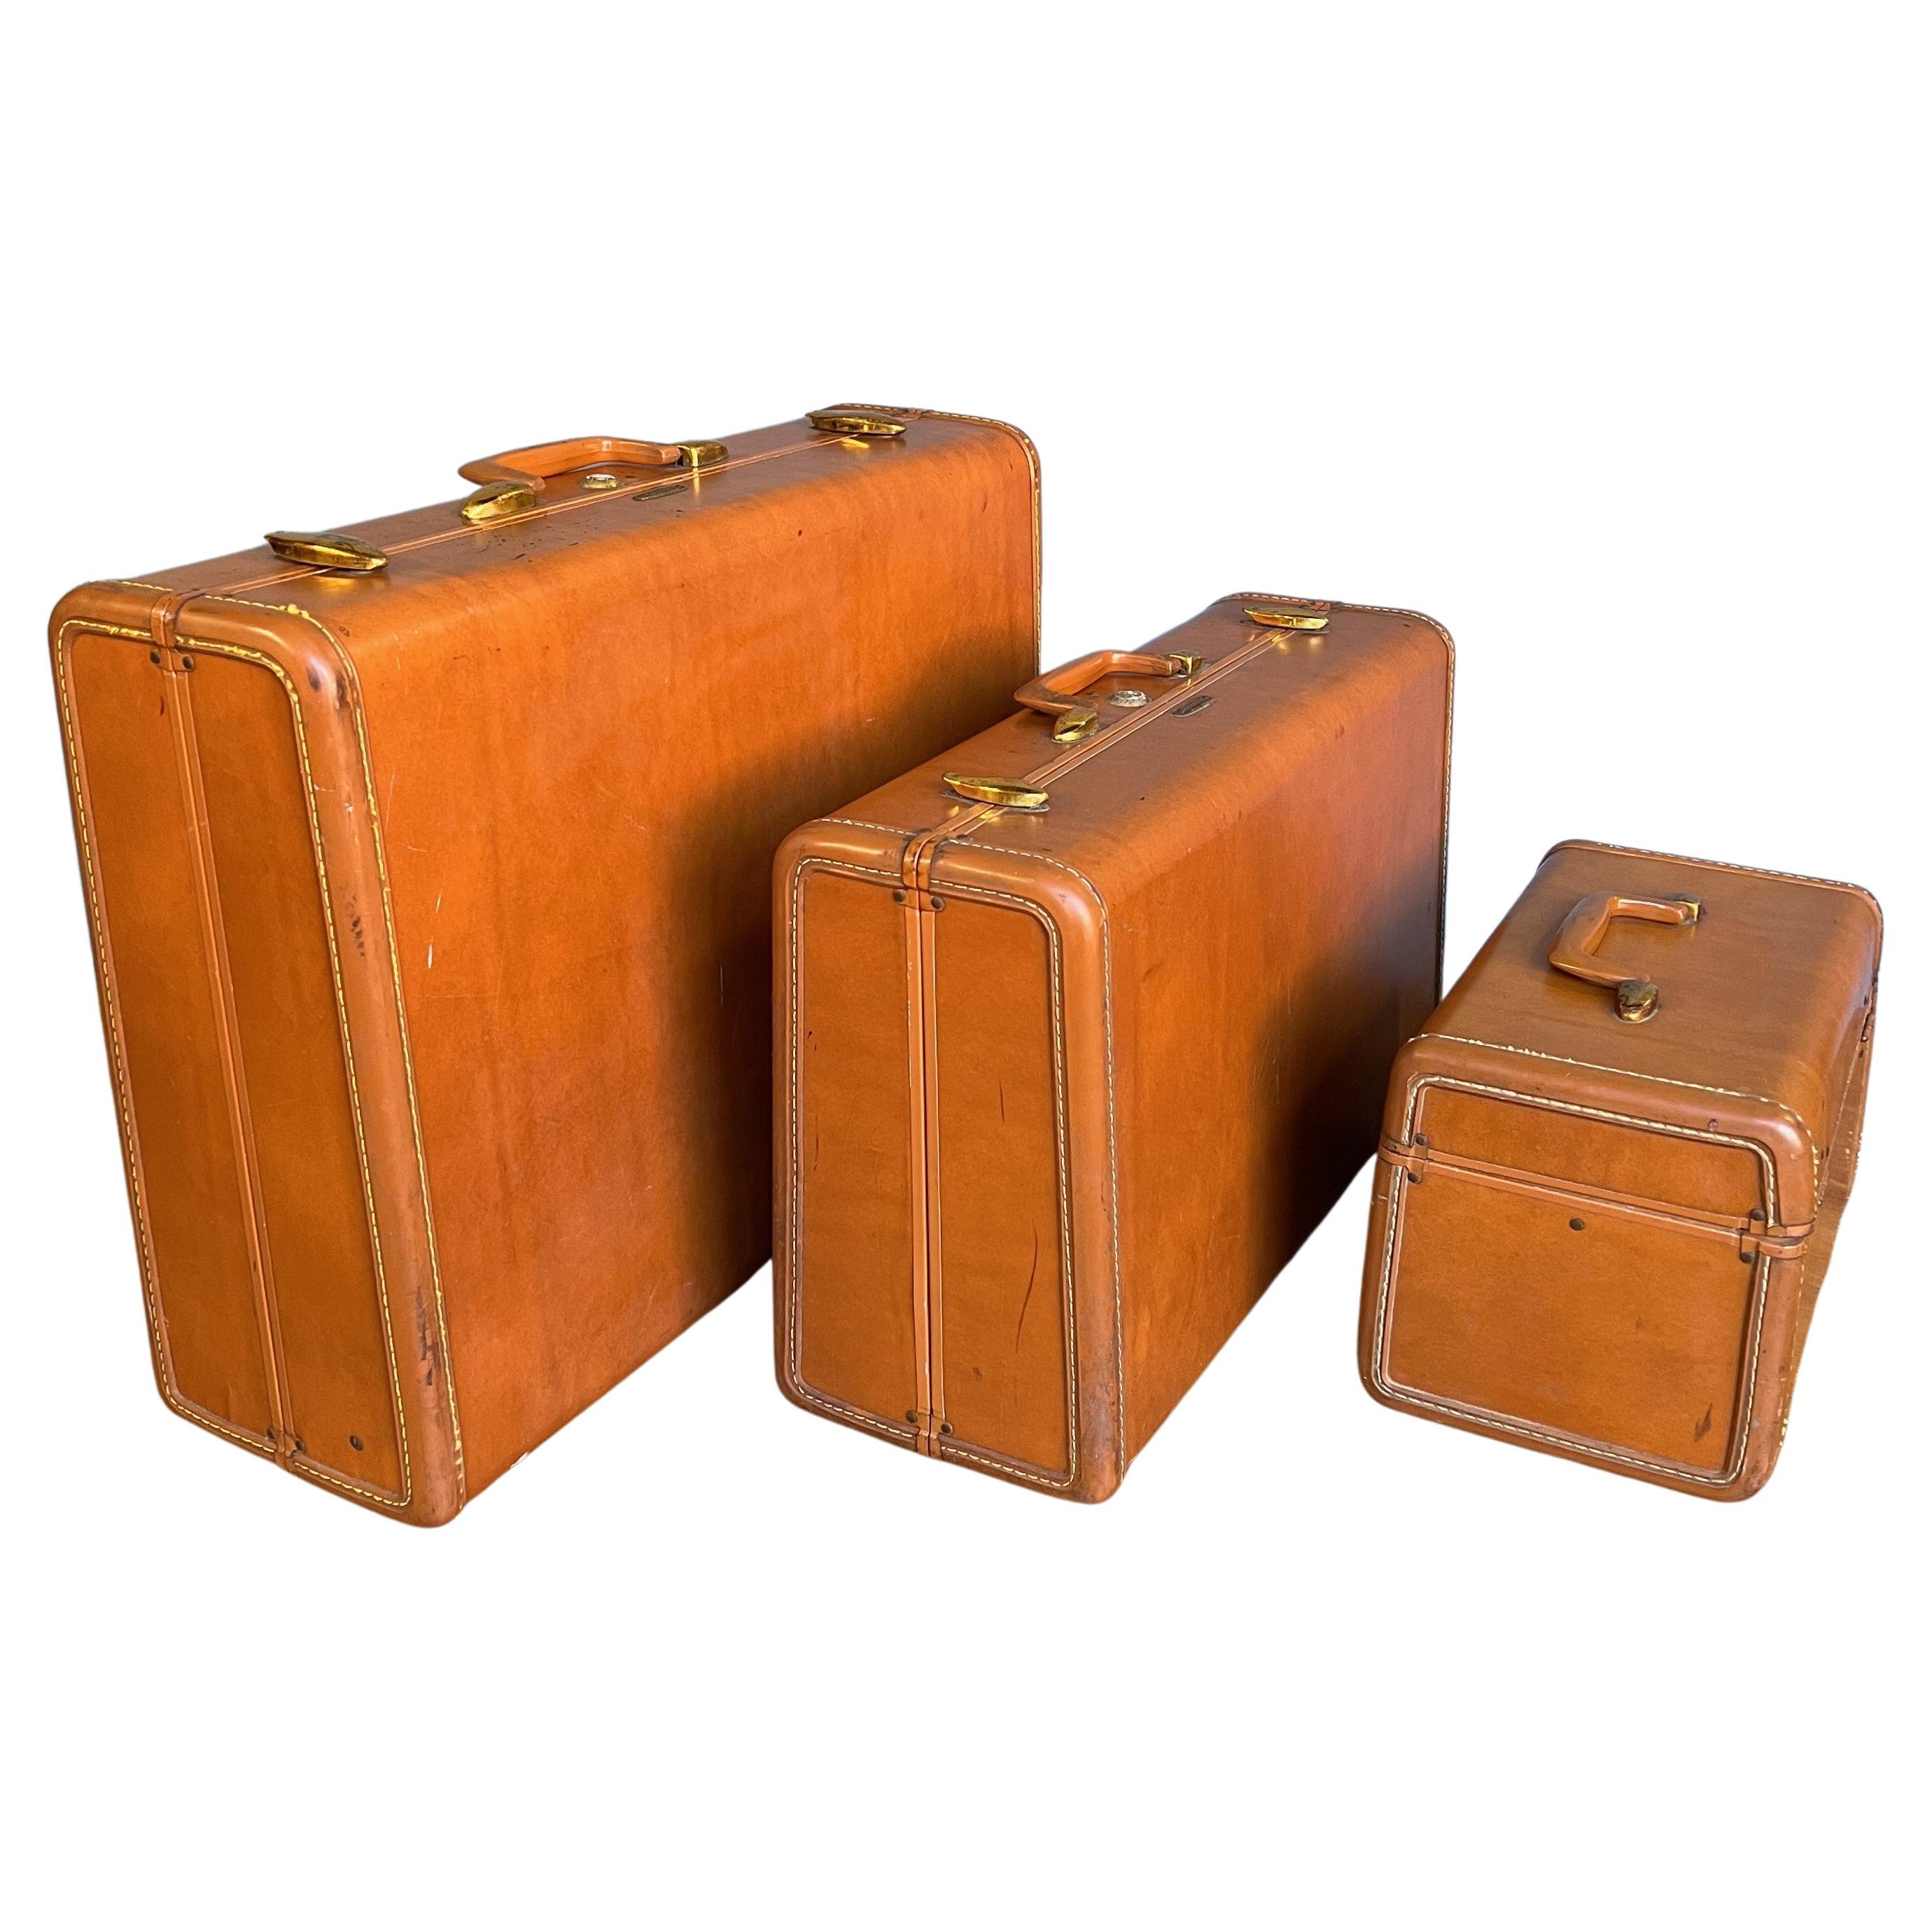 Sold at Auction: Vintage Louis Vuitton Small Hard Suitcase, with leather Louis  Vuitton luggage tag, H.- 16 1/2 in., W.- 24 in., D.- 8 1/2 in.